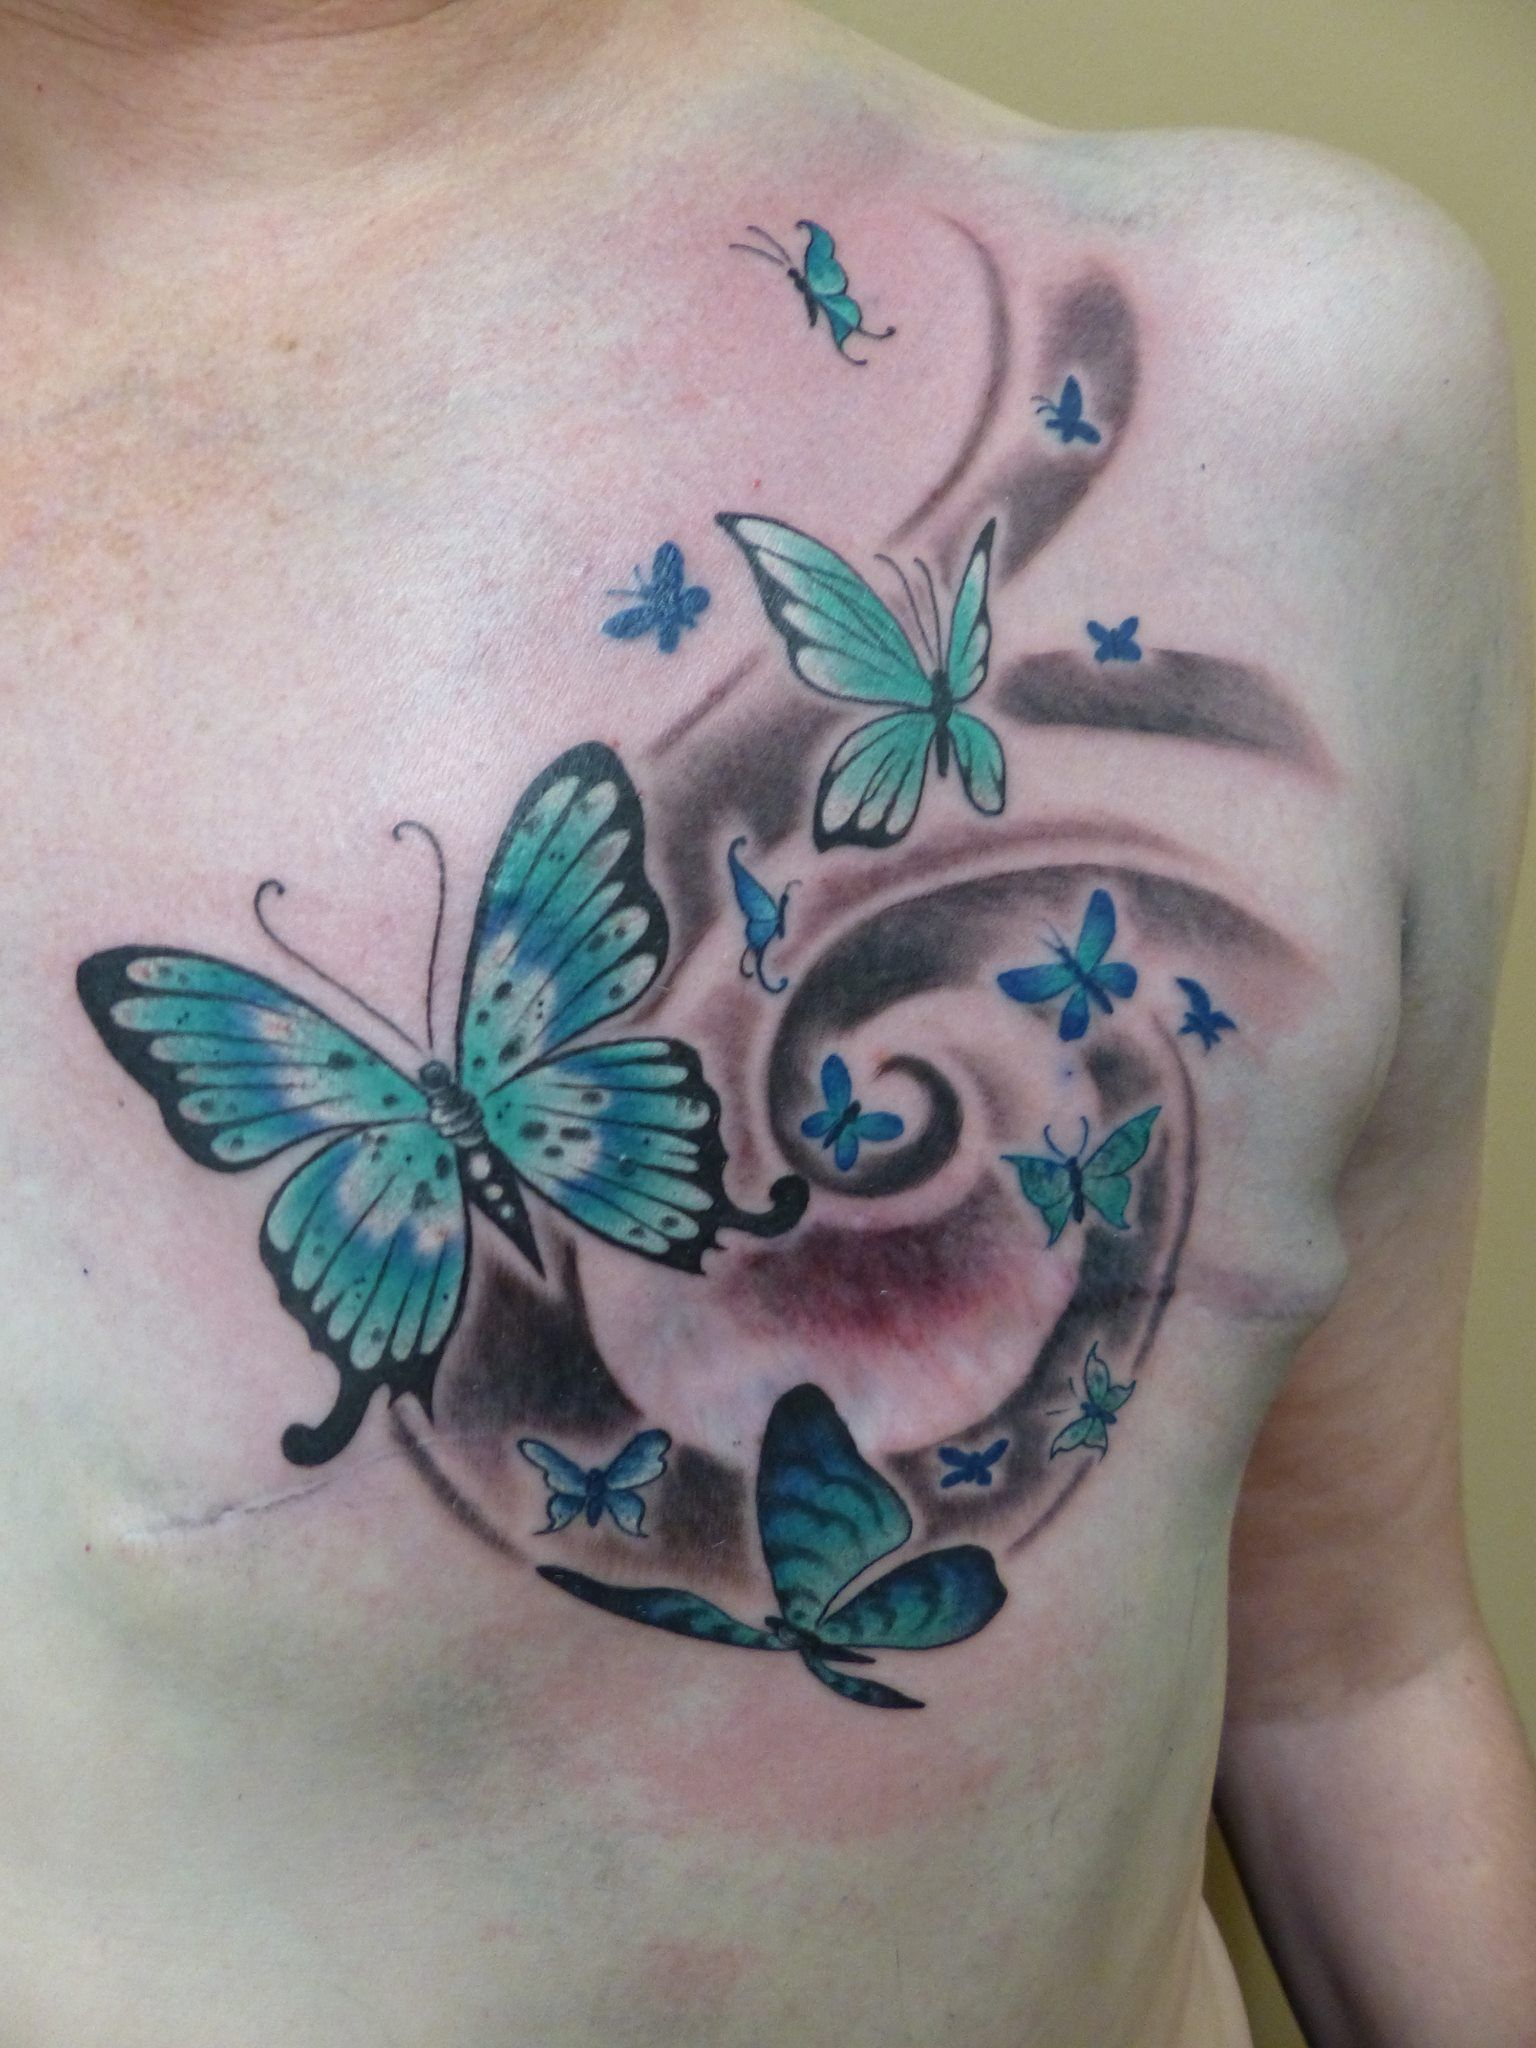 Flowing Butterflies Inspiring Mastectomy Tattoo Stacie Rae throughout proportions 1536 X 2048